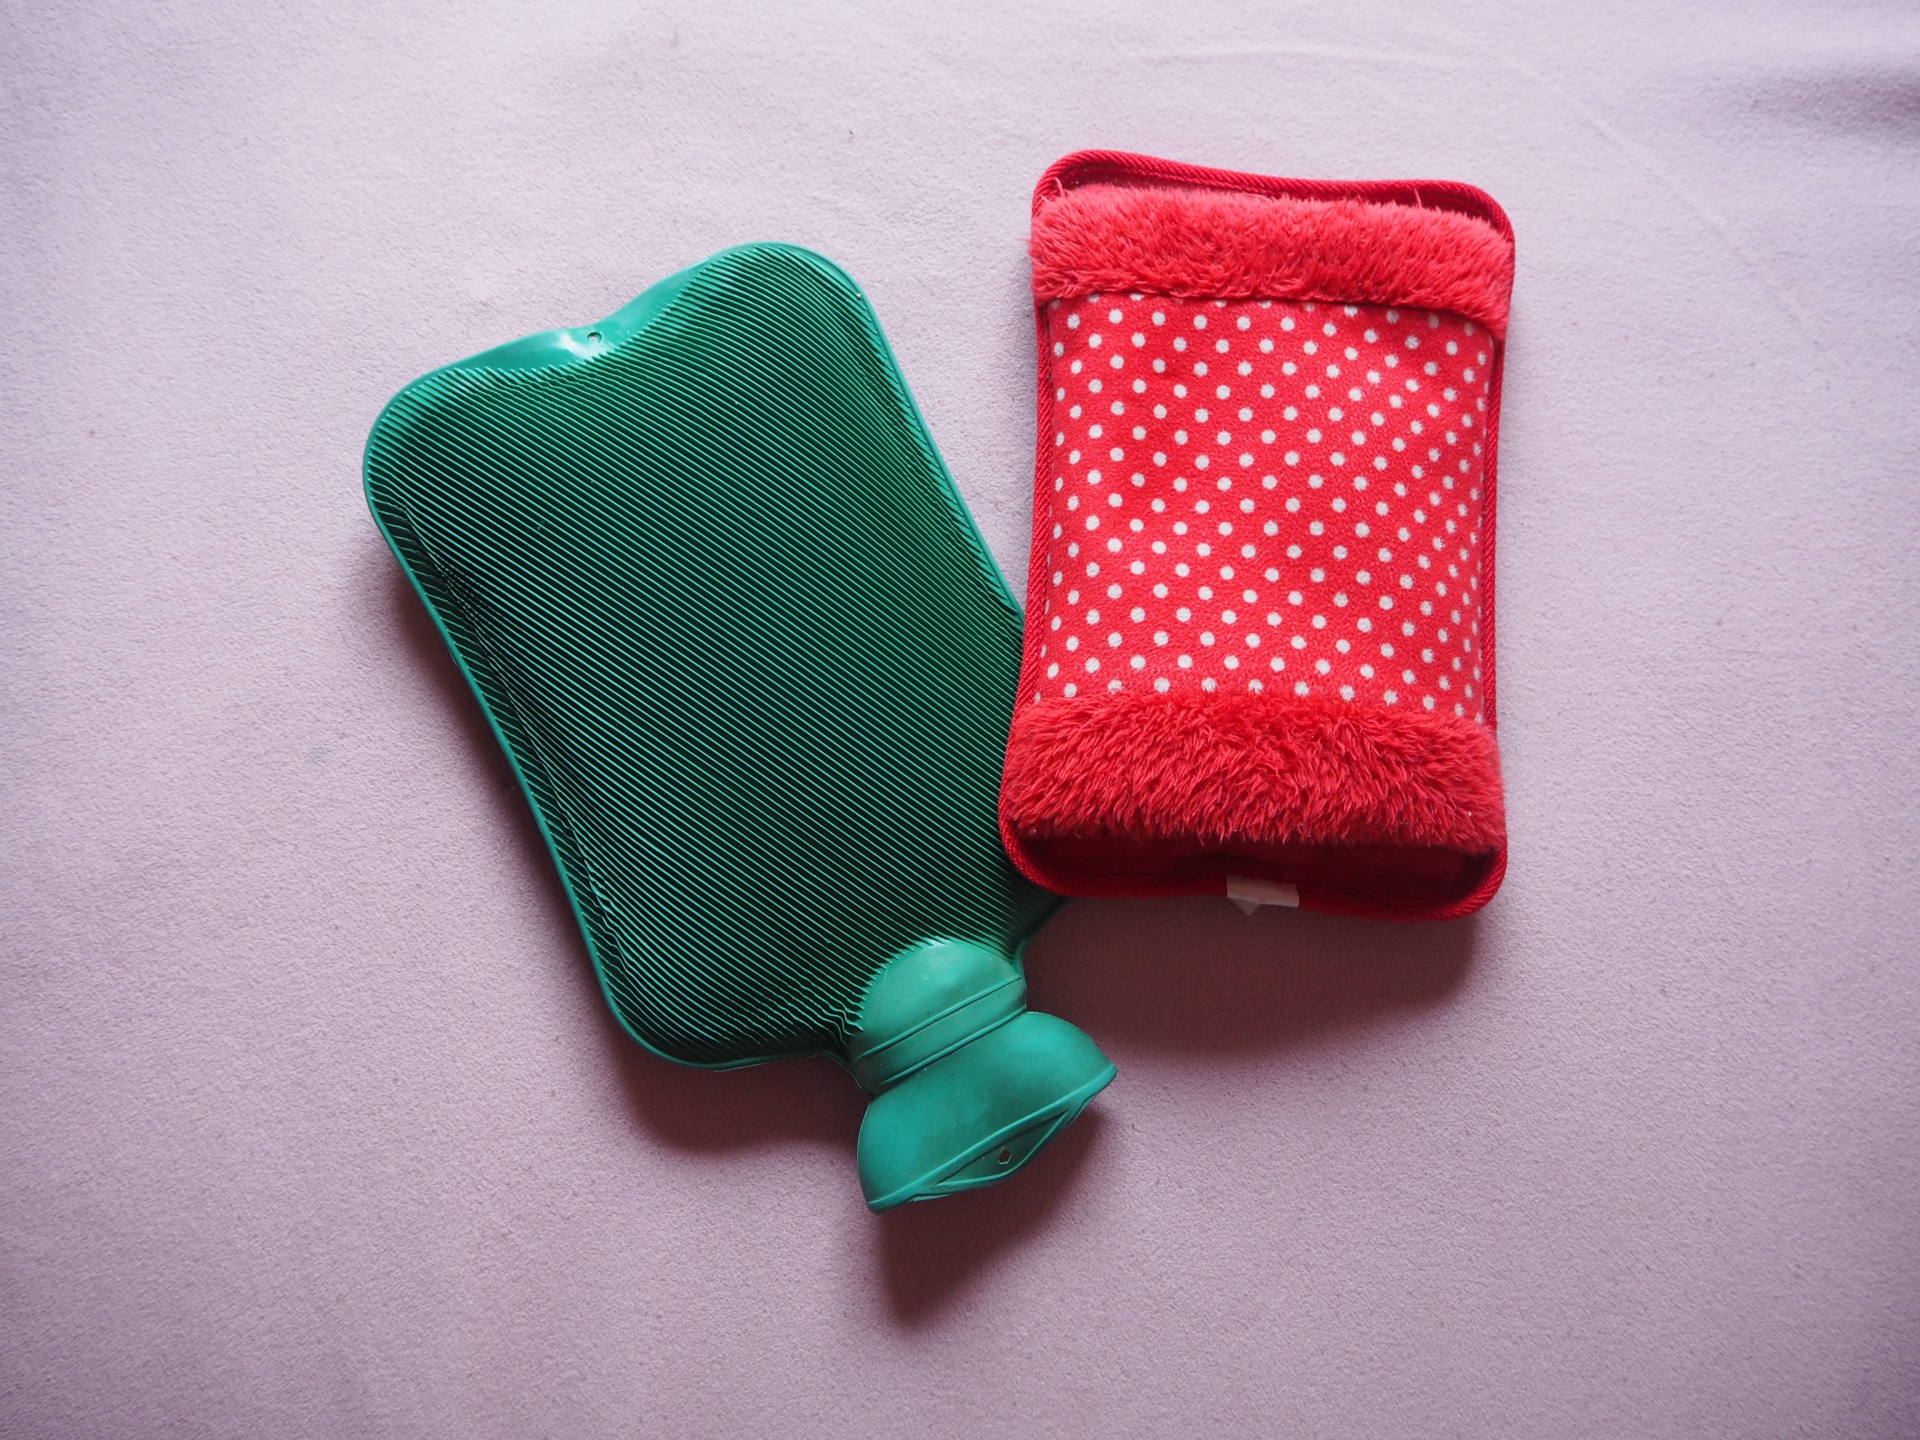 Two hot-water bags, one normal, one electric, lying on a light pink sheet